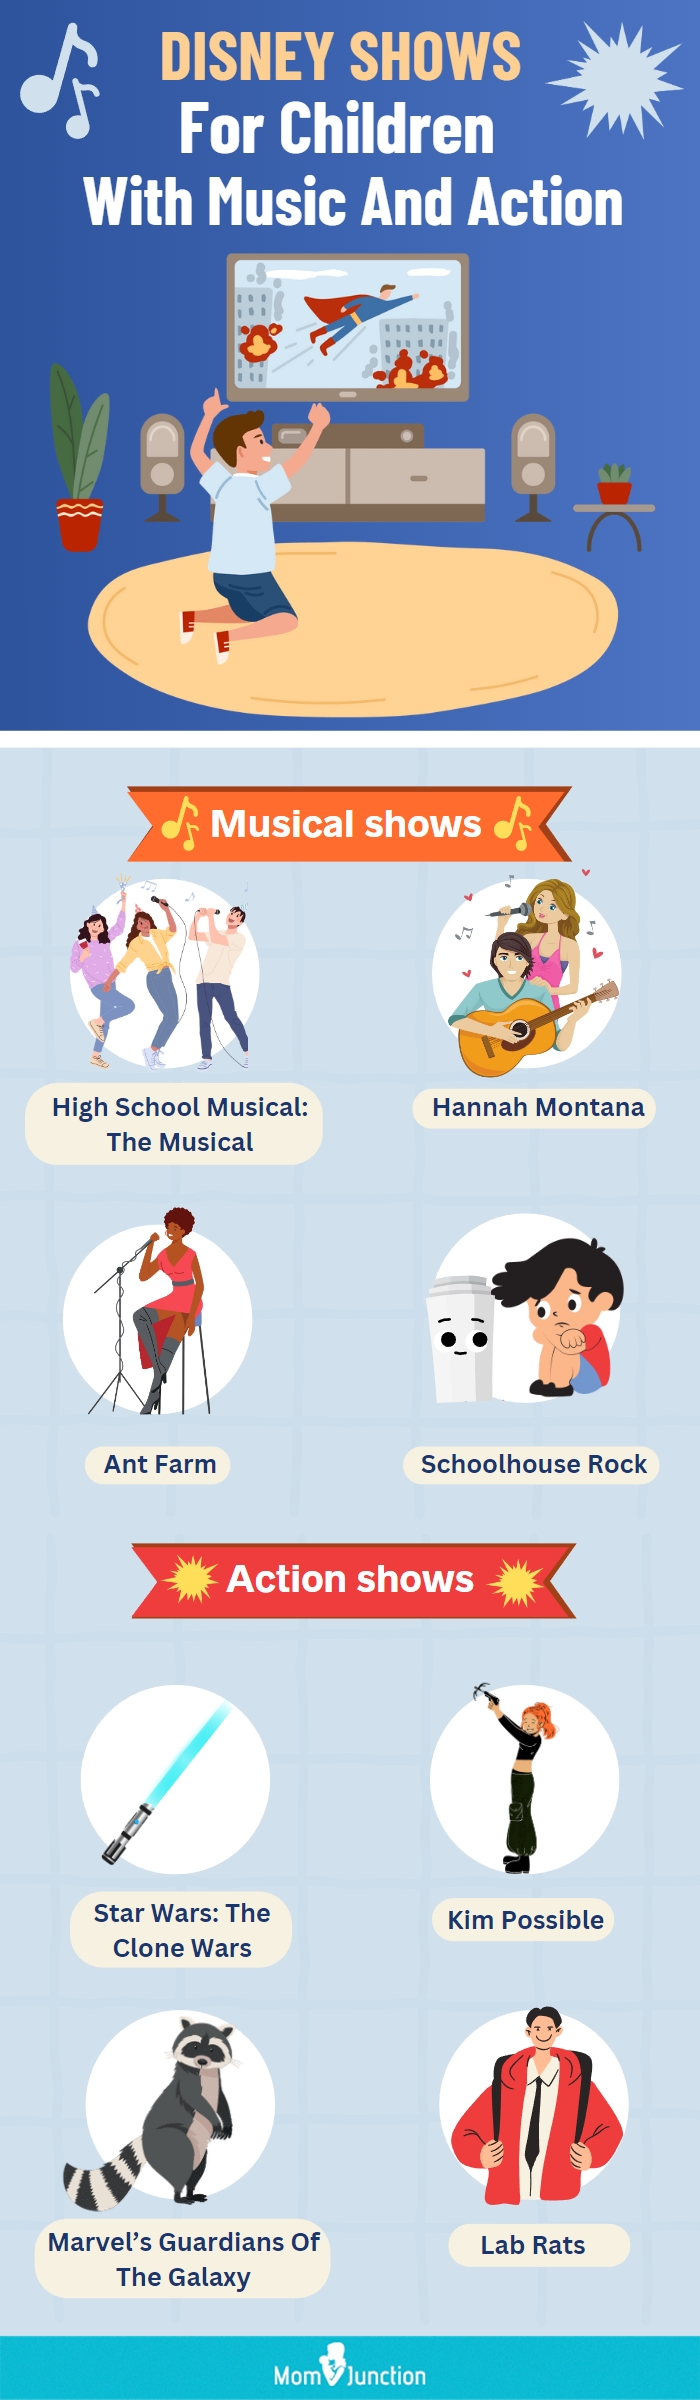 disney shows for children with music and action (infographic)